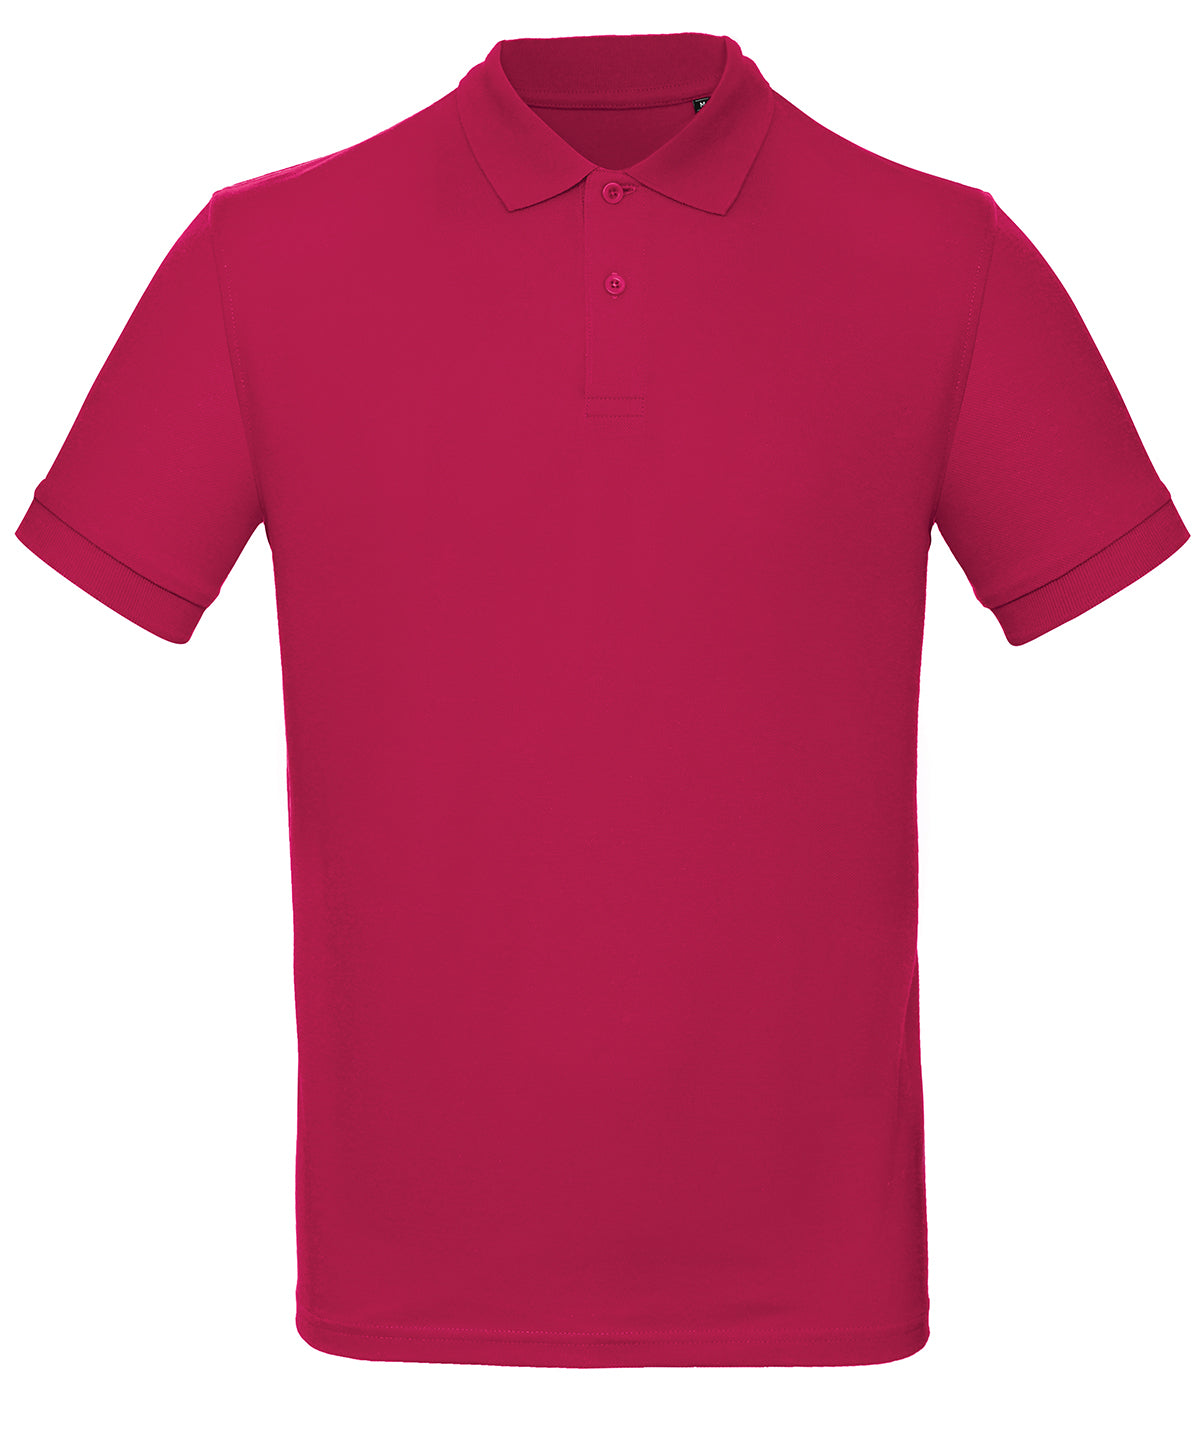 Personalised Polo Shirts - Mid Orange B&C Collection B&C Inspire Polo /men